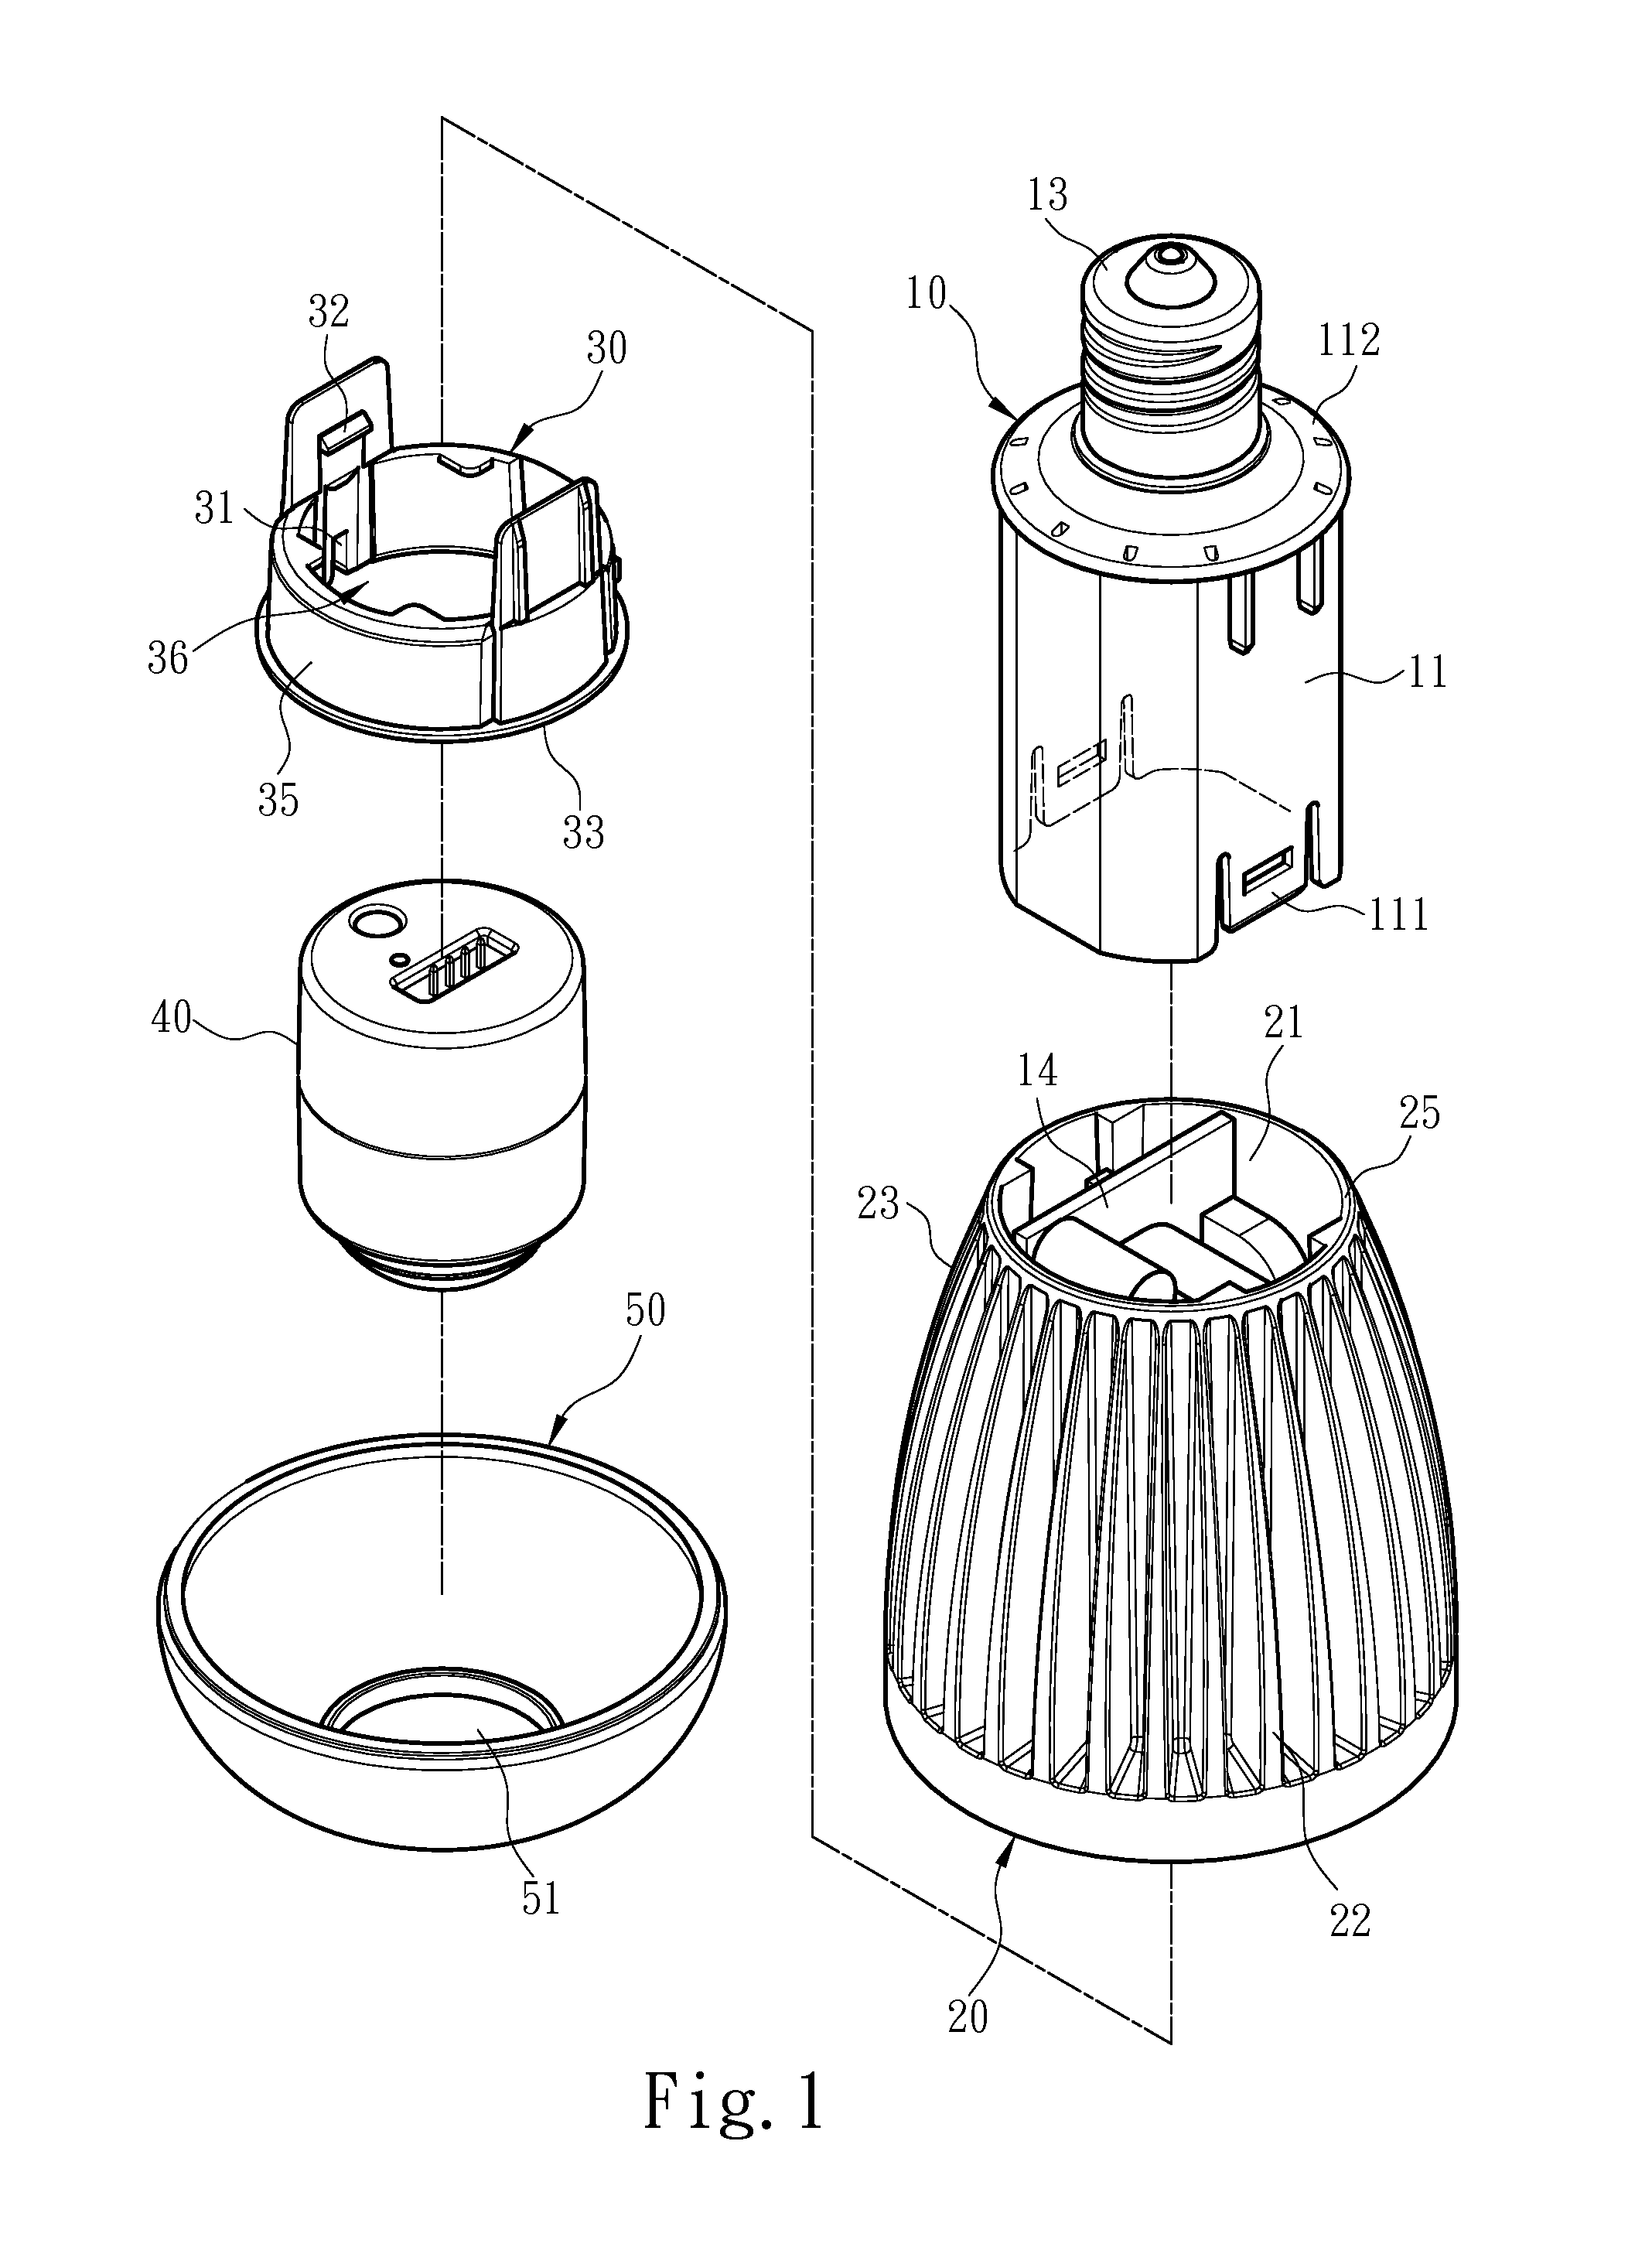 Heat dissipation structure for light bulb assembly